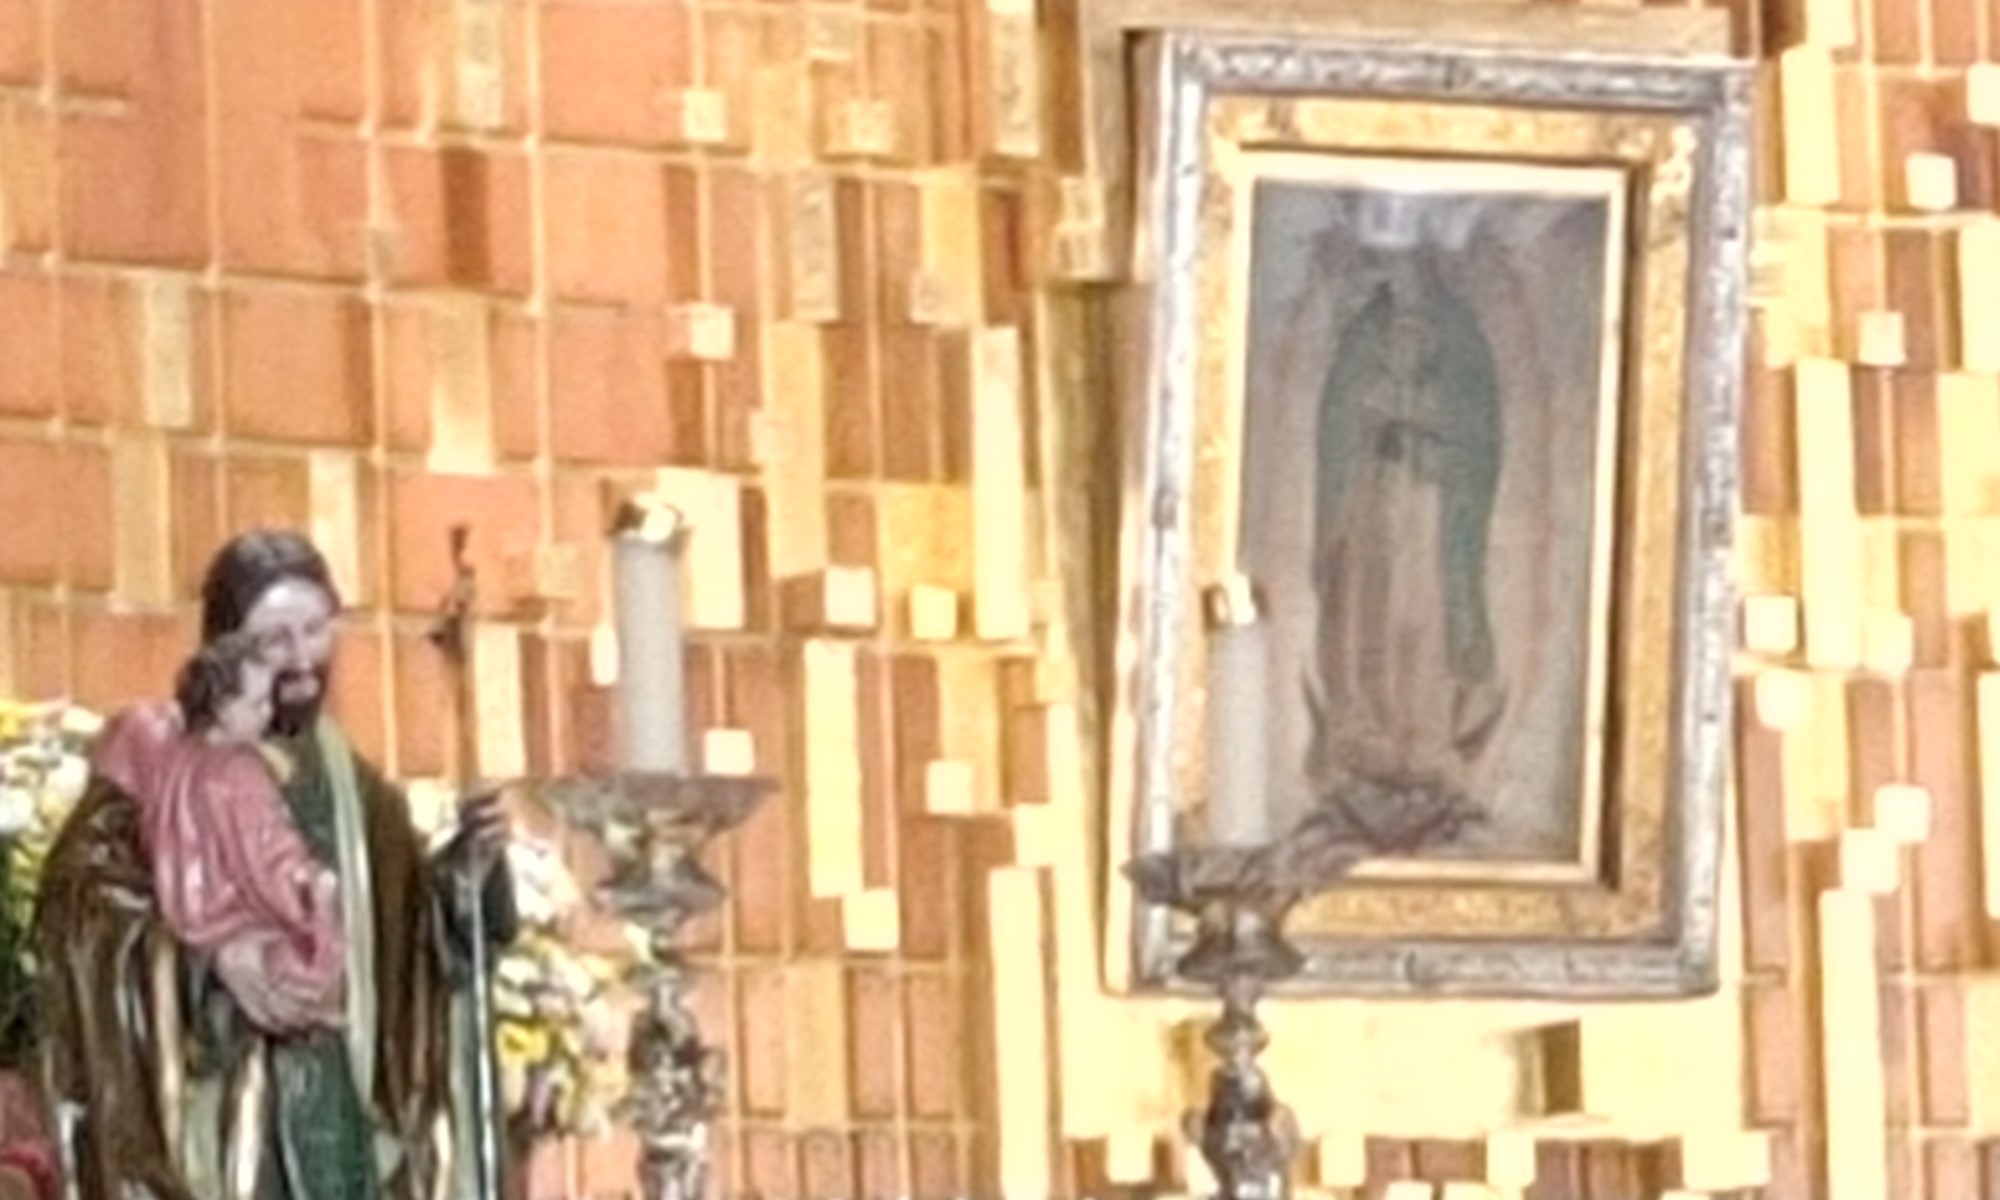 Side trip: Our Lady of Guadalupe, Mexico City